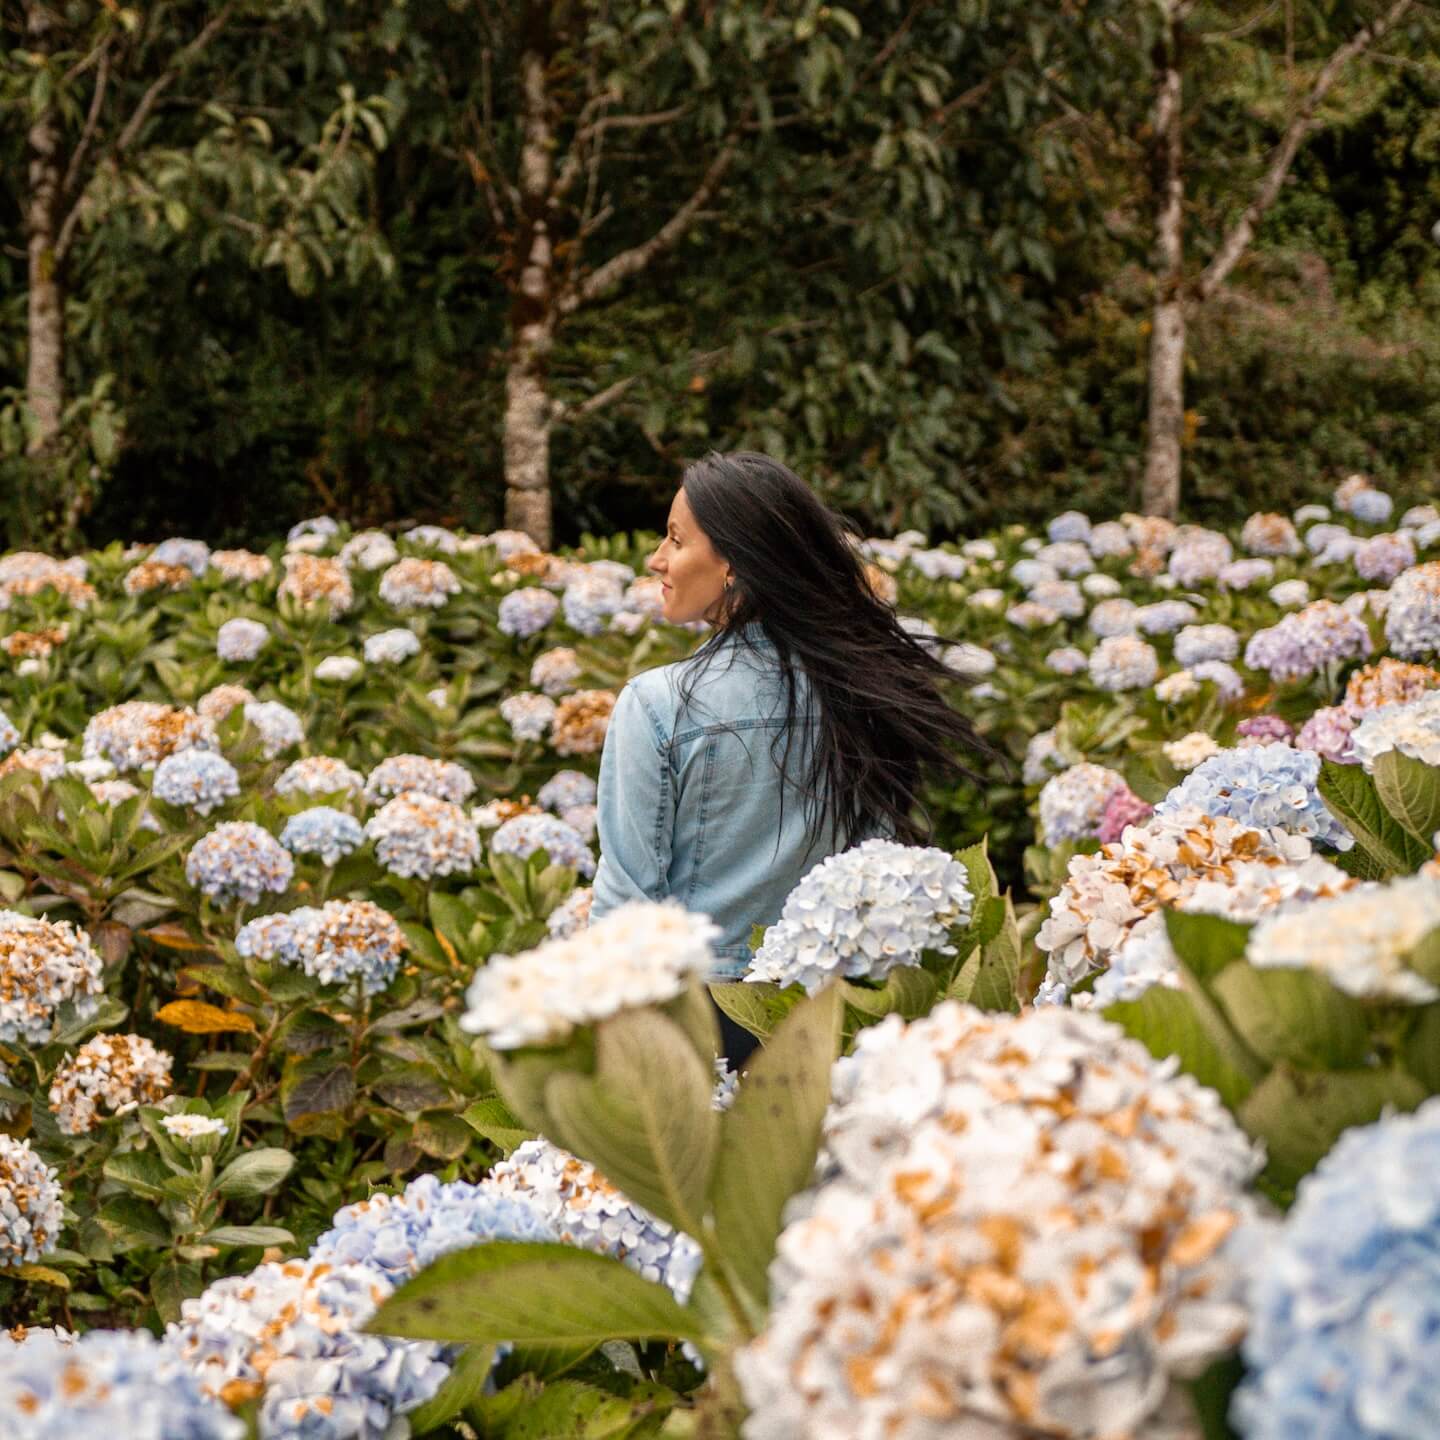 Stella between flowers at Doi Inthanon National Park